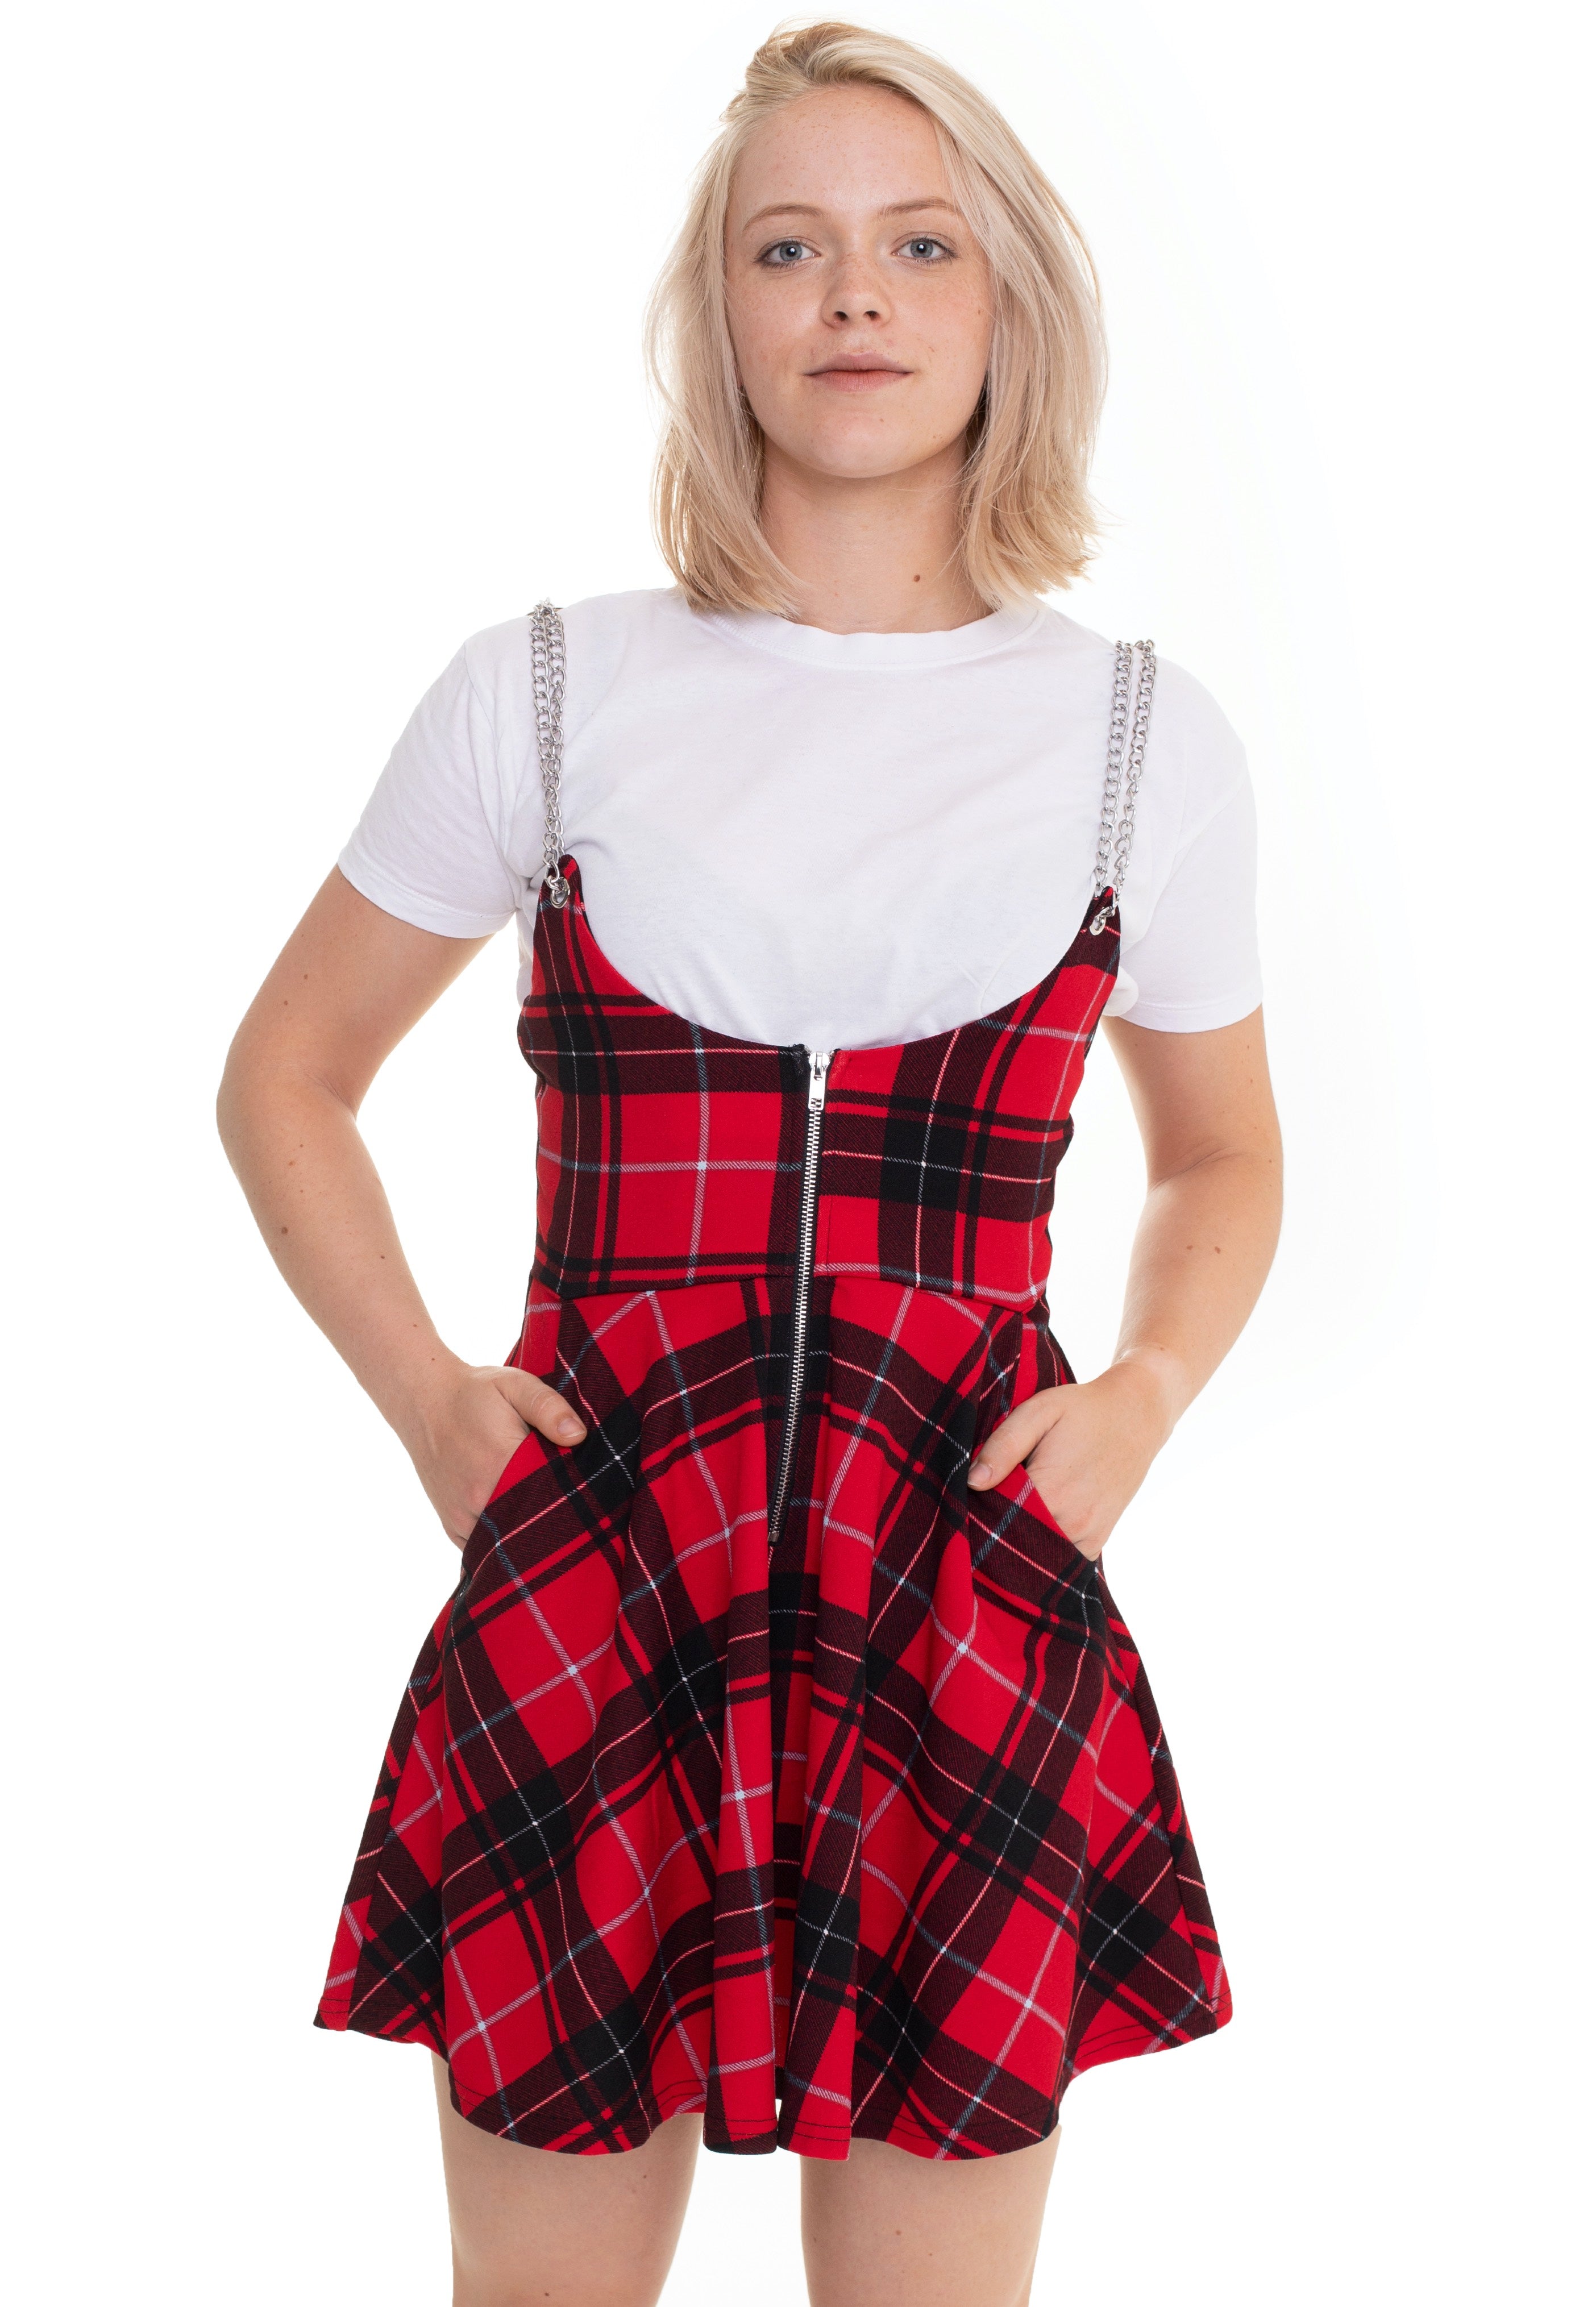 Jawbreaker - High Waisted With Chain Straps Red - Skirt